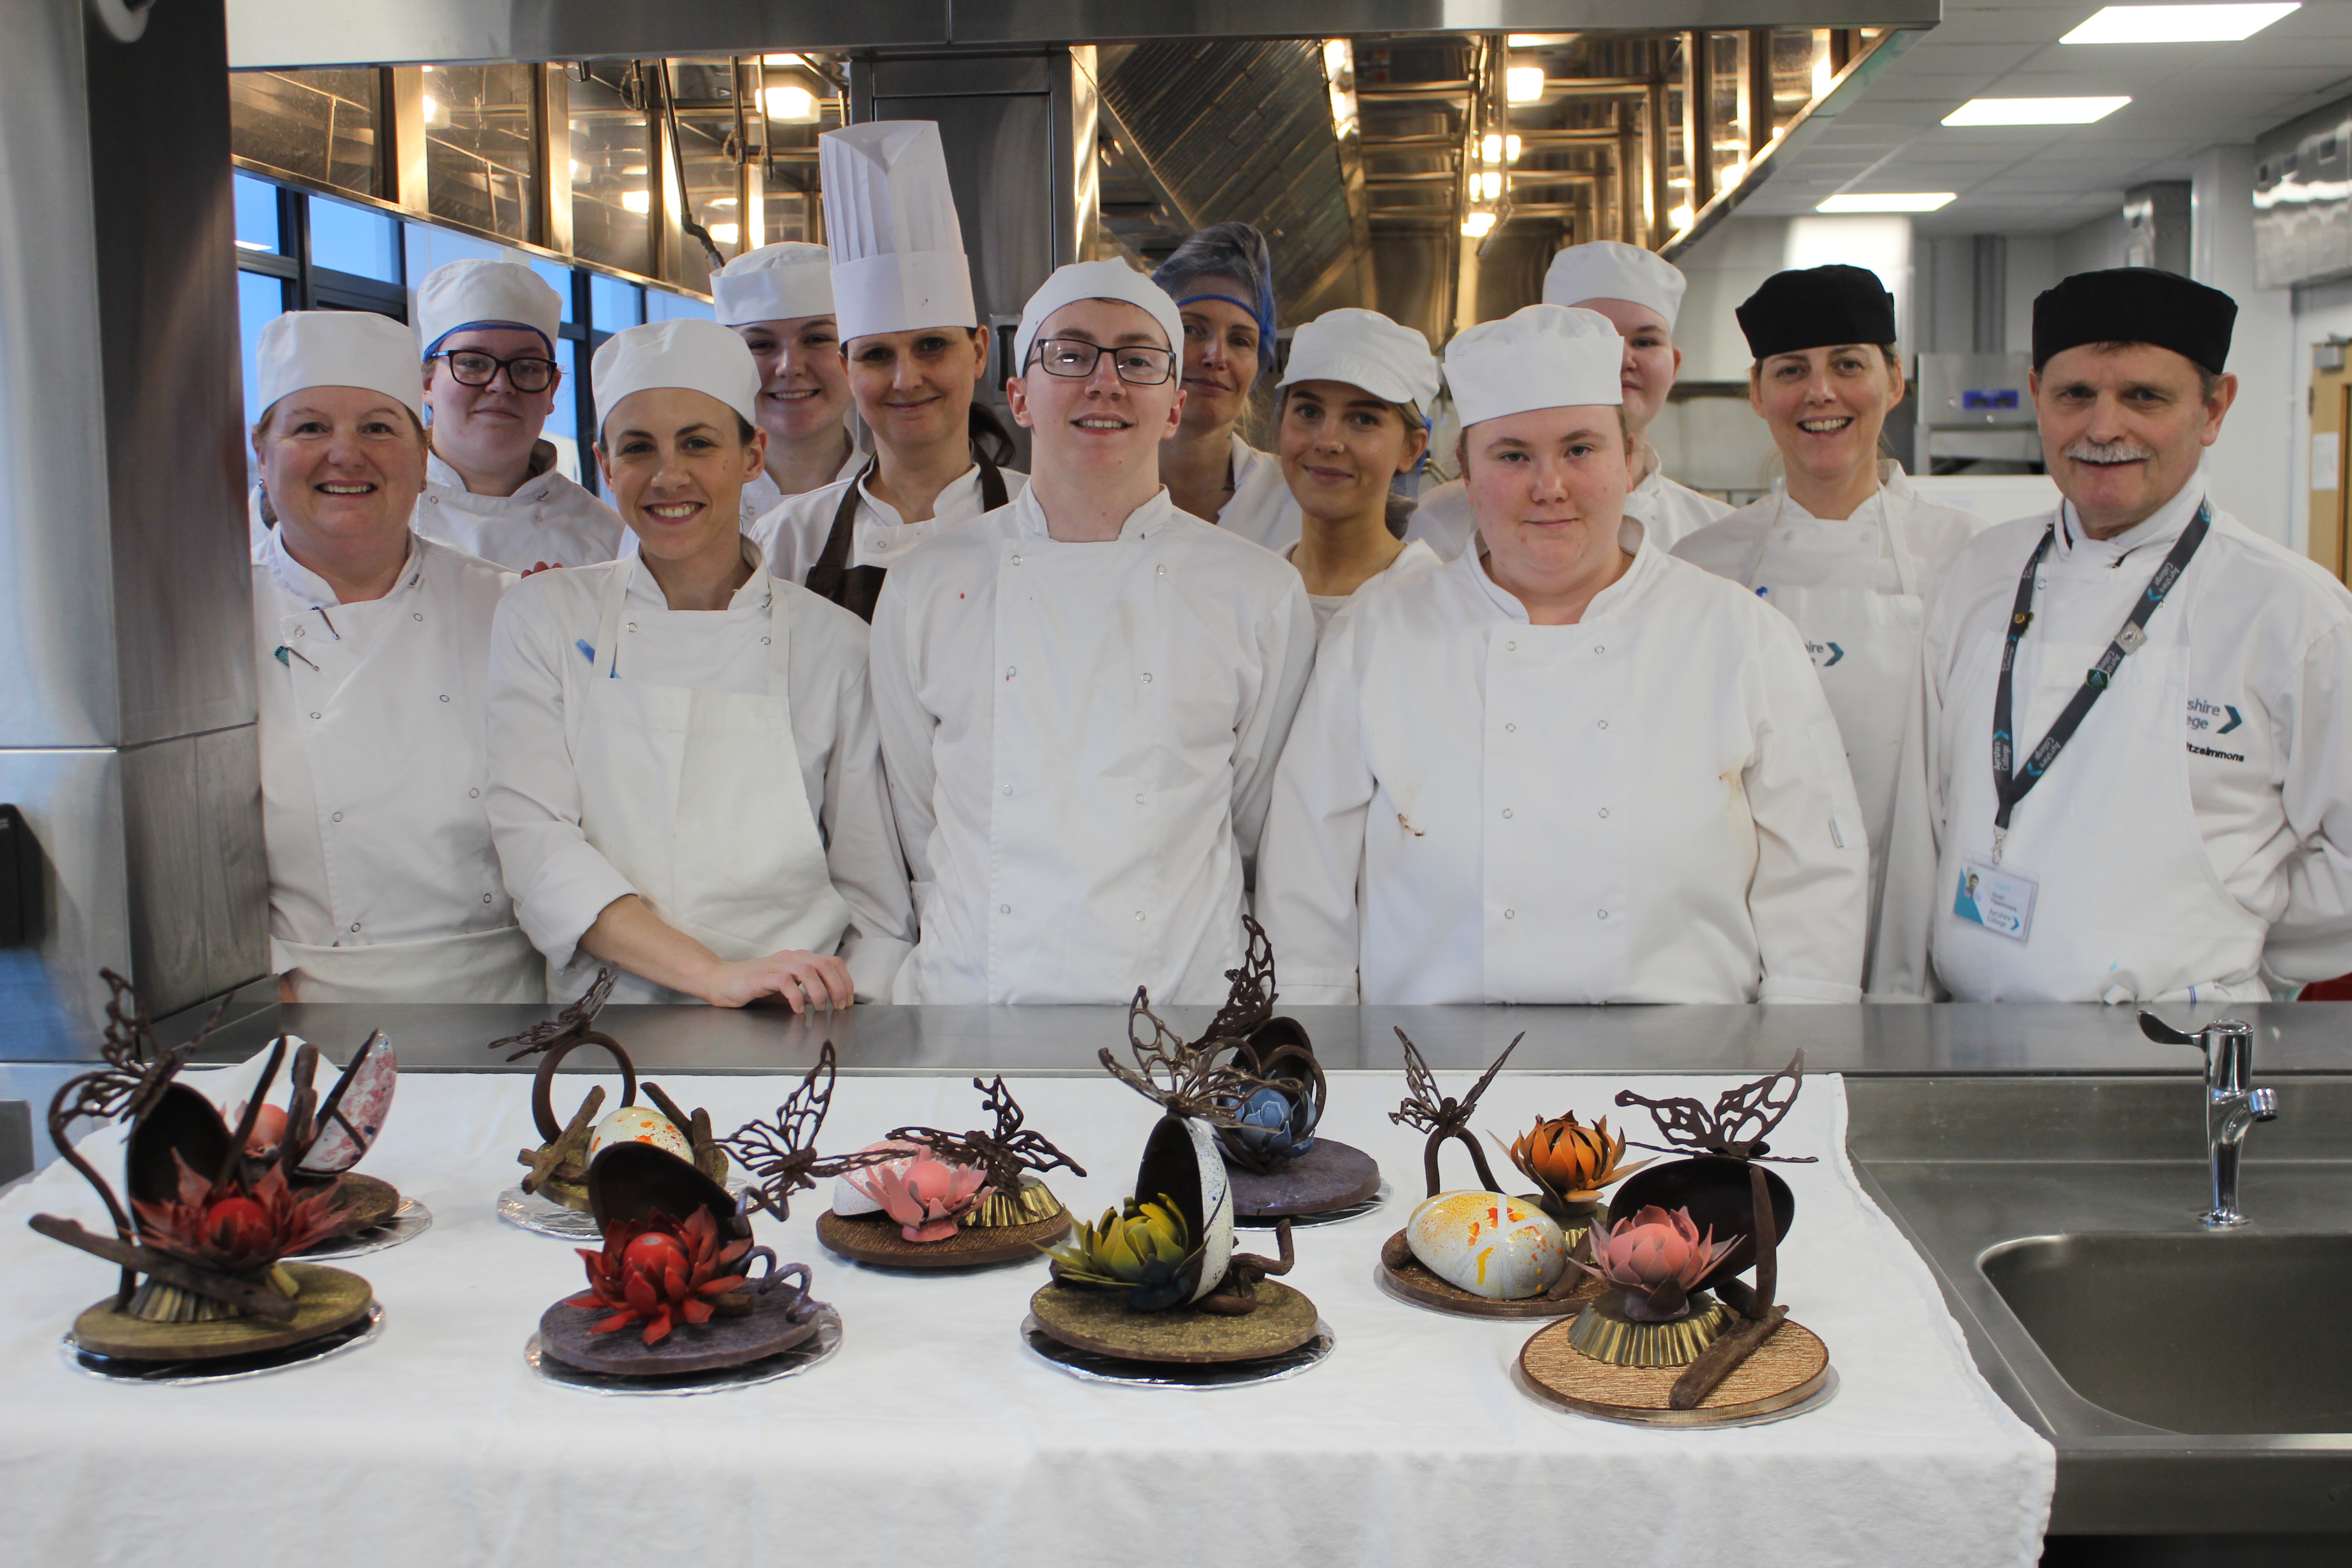 Professional Cookery students inspired by industry 